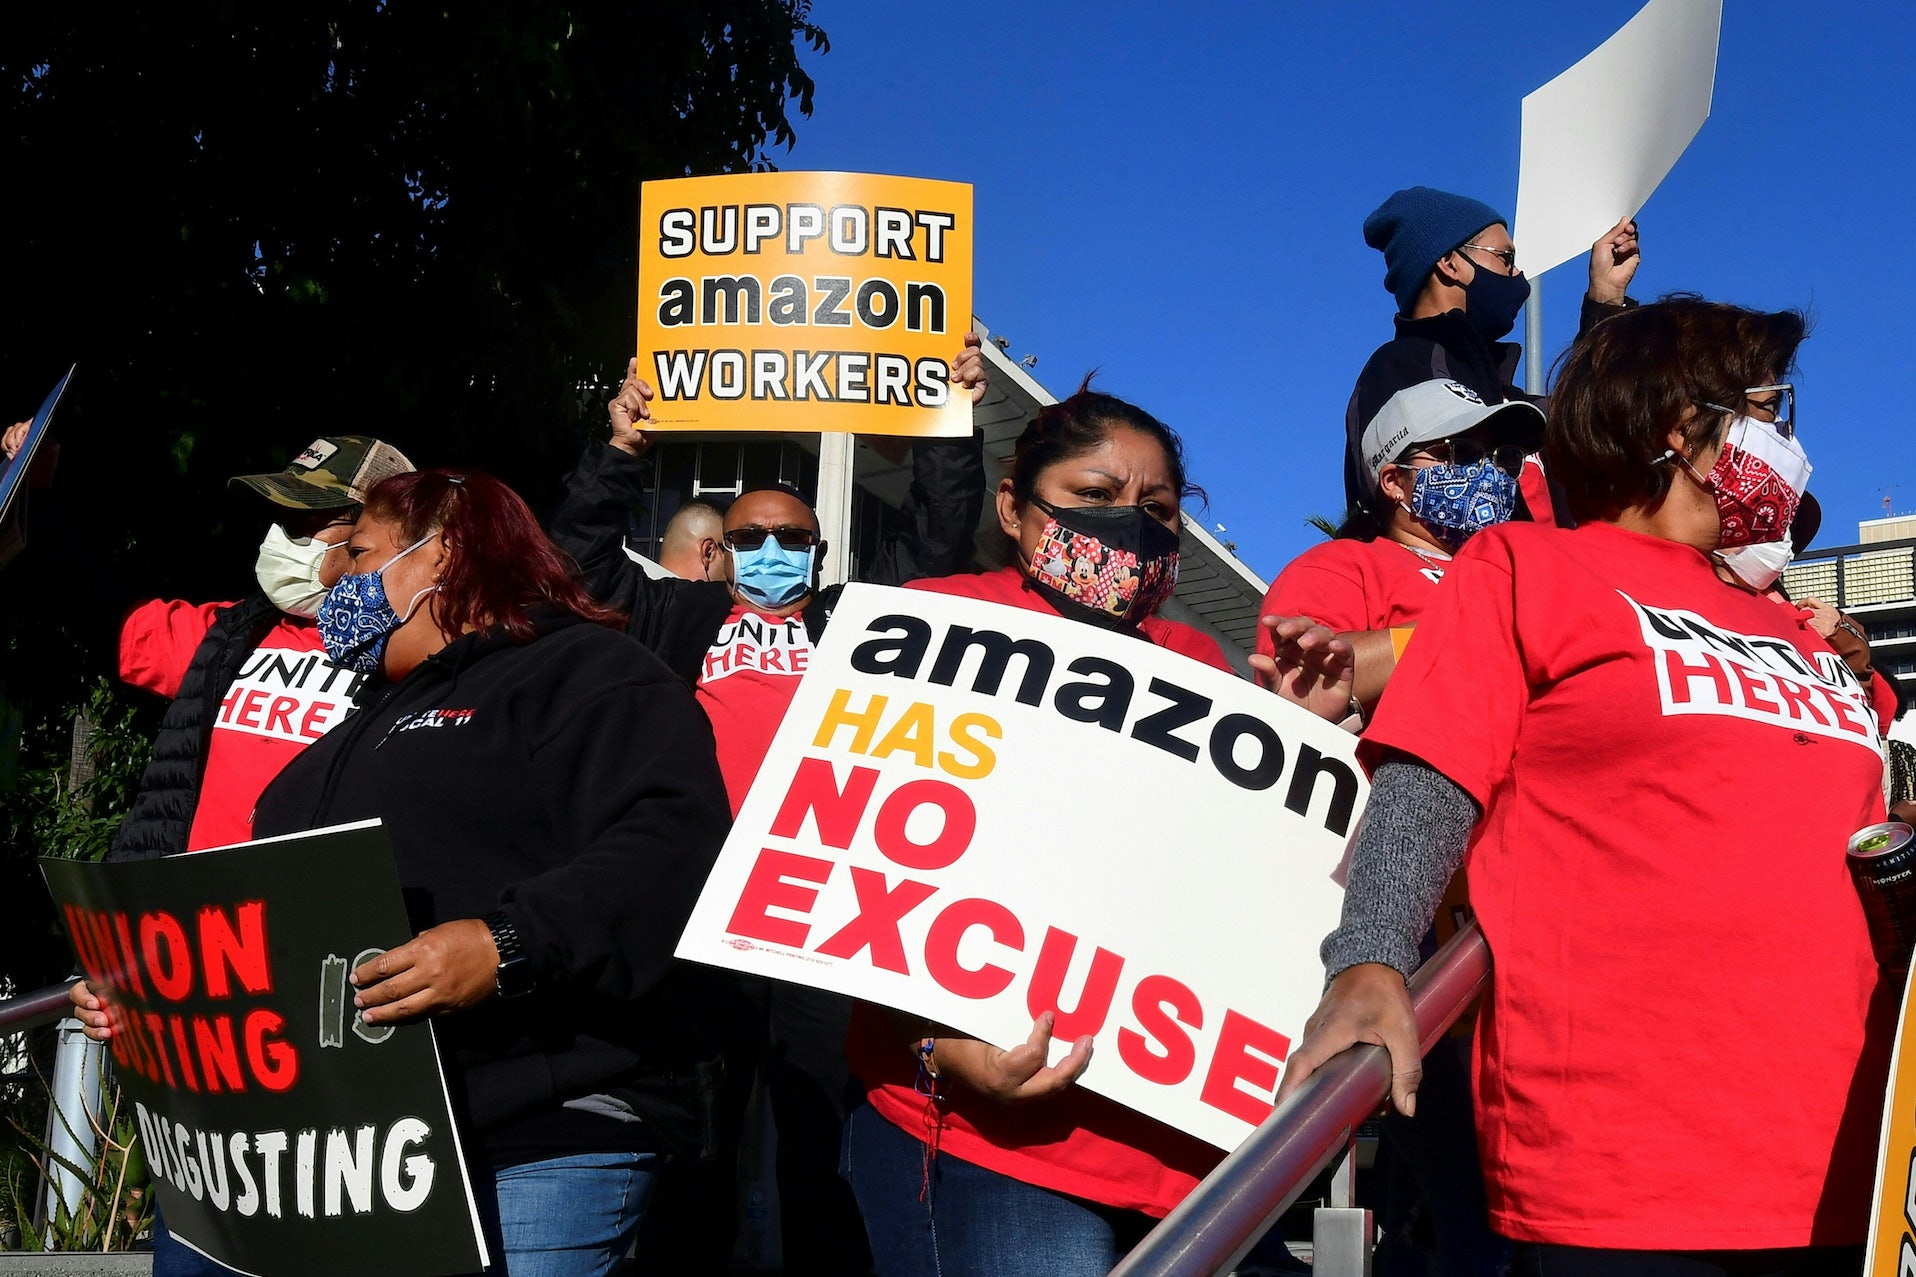 Amazon workers protesting the company's union busting.